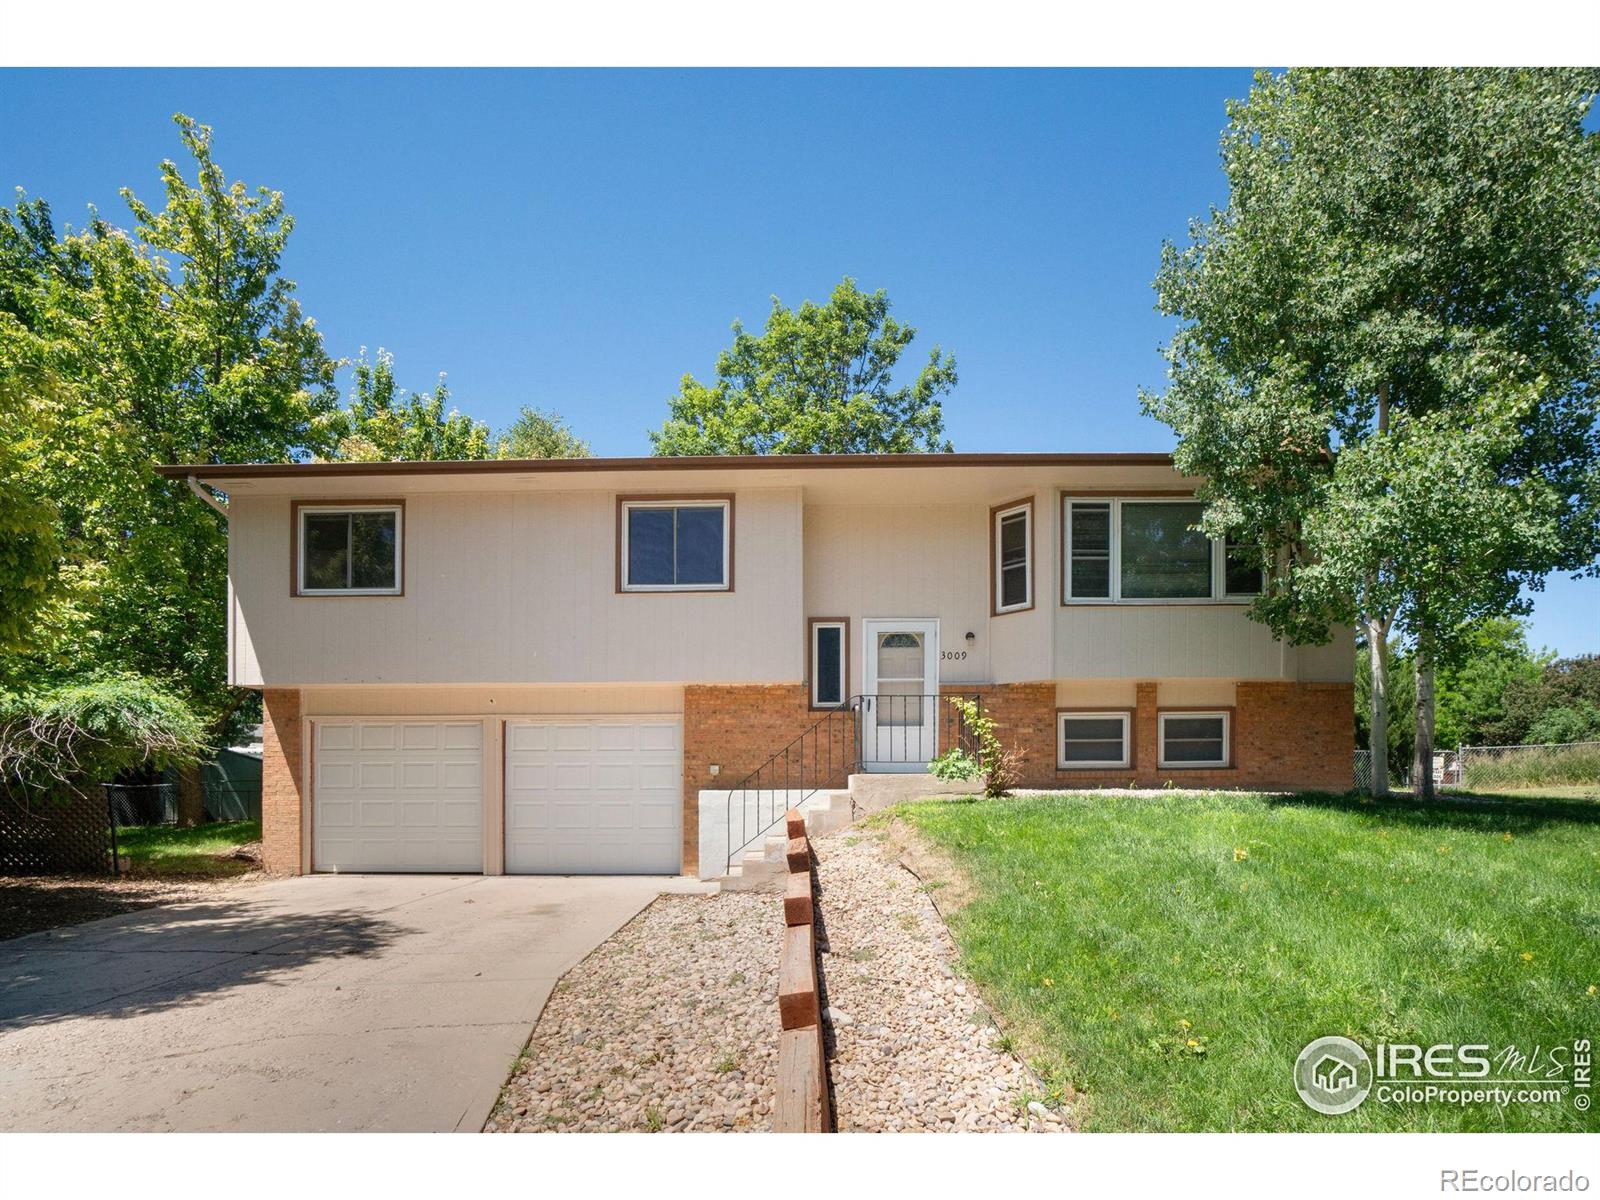 3009  Southmoor Court, fort collins MLS: 4567891013998 Beds: 4 Baths: 3 Price: $485,000